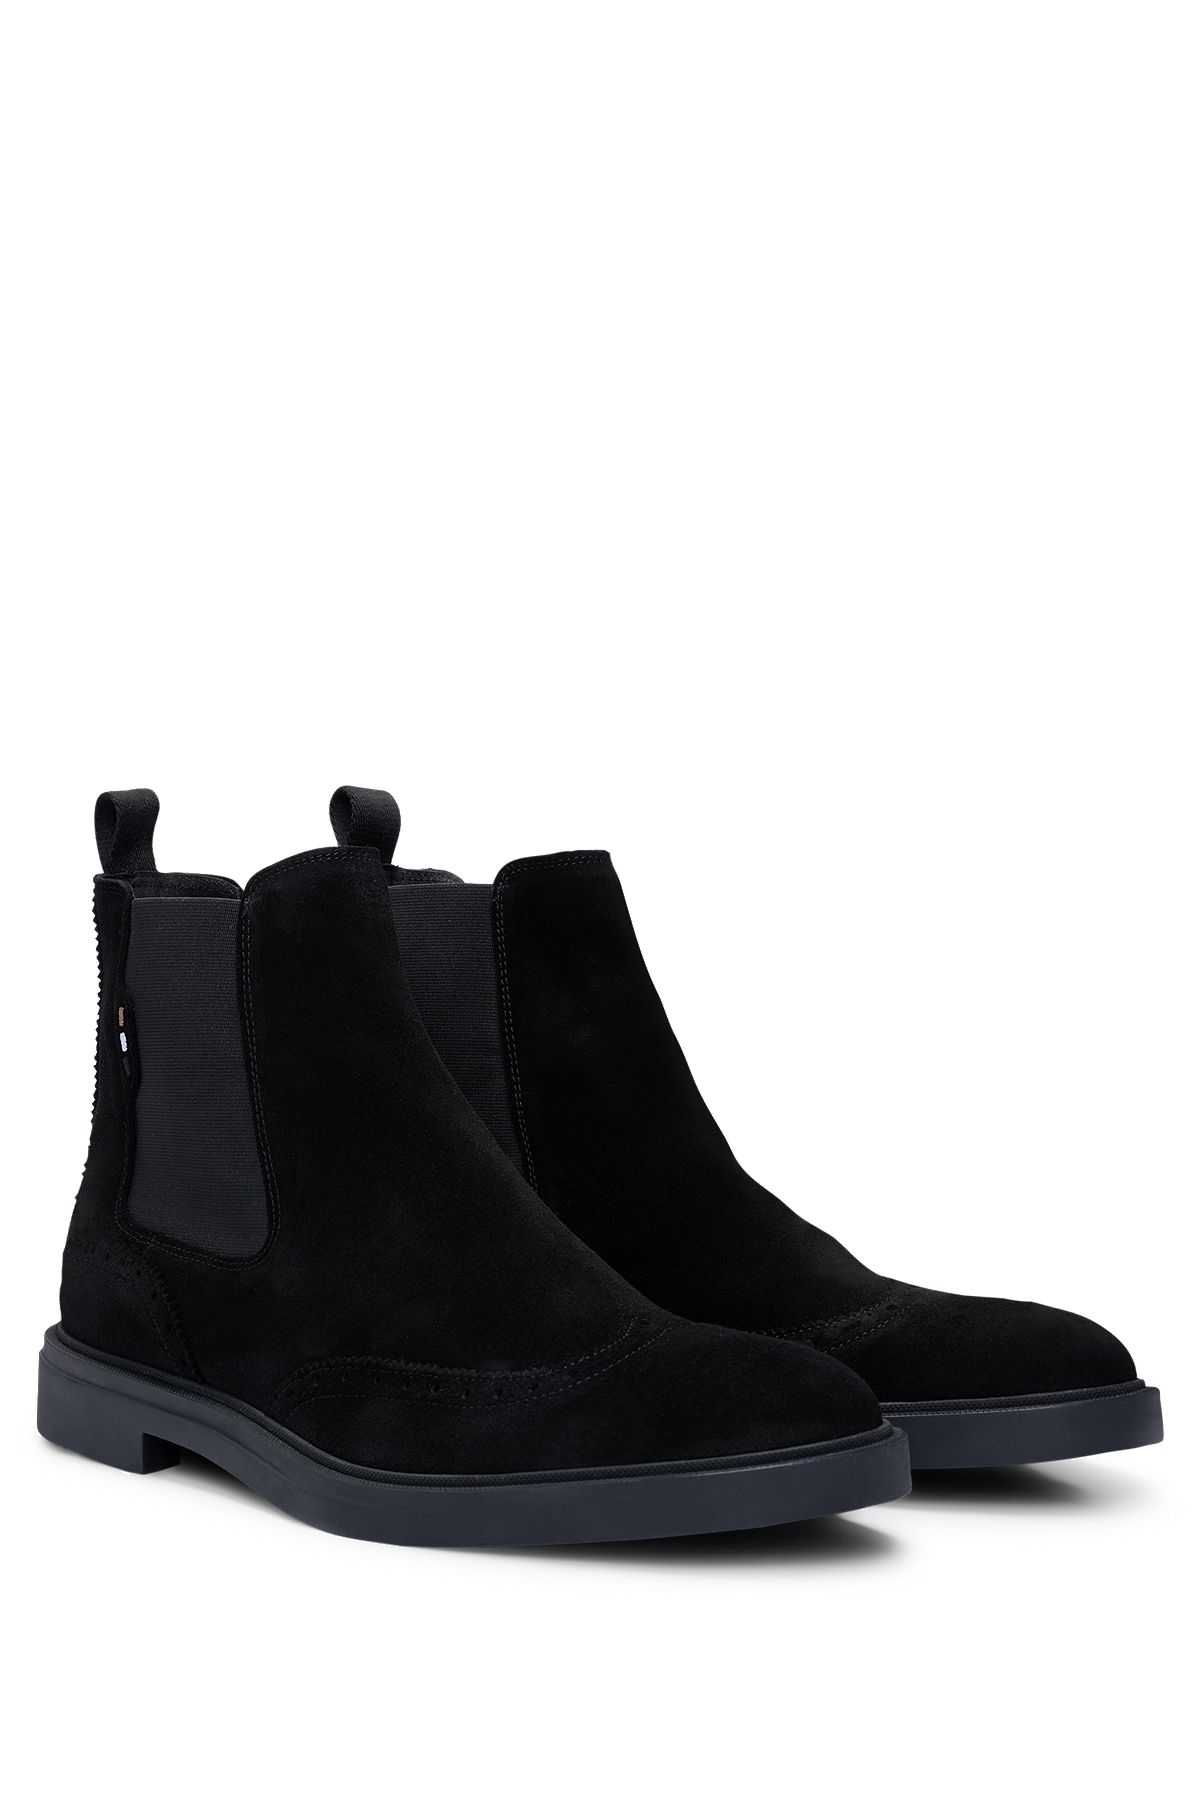 Suede Chelsea boots with brogue details, Black